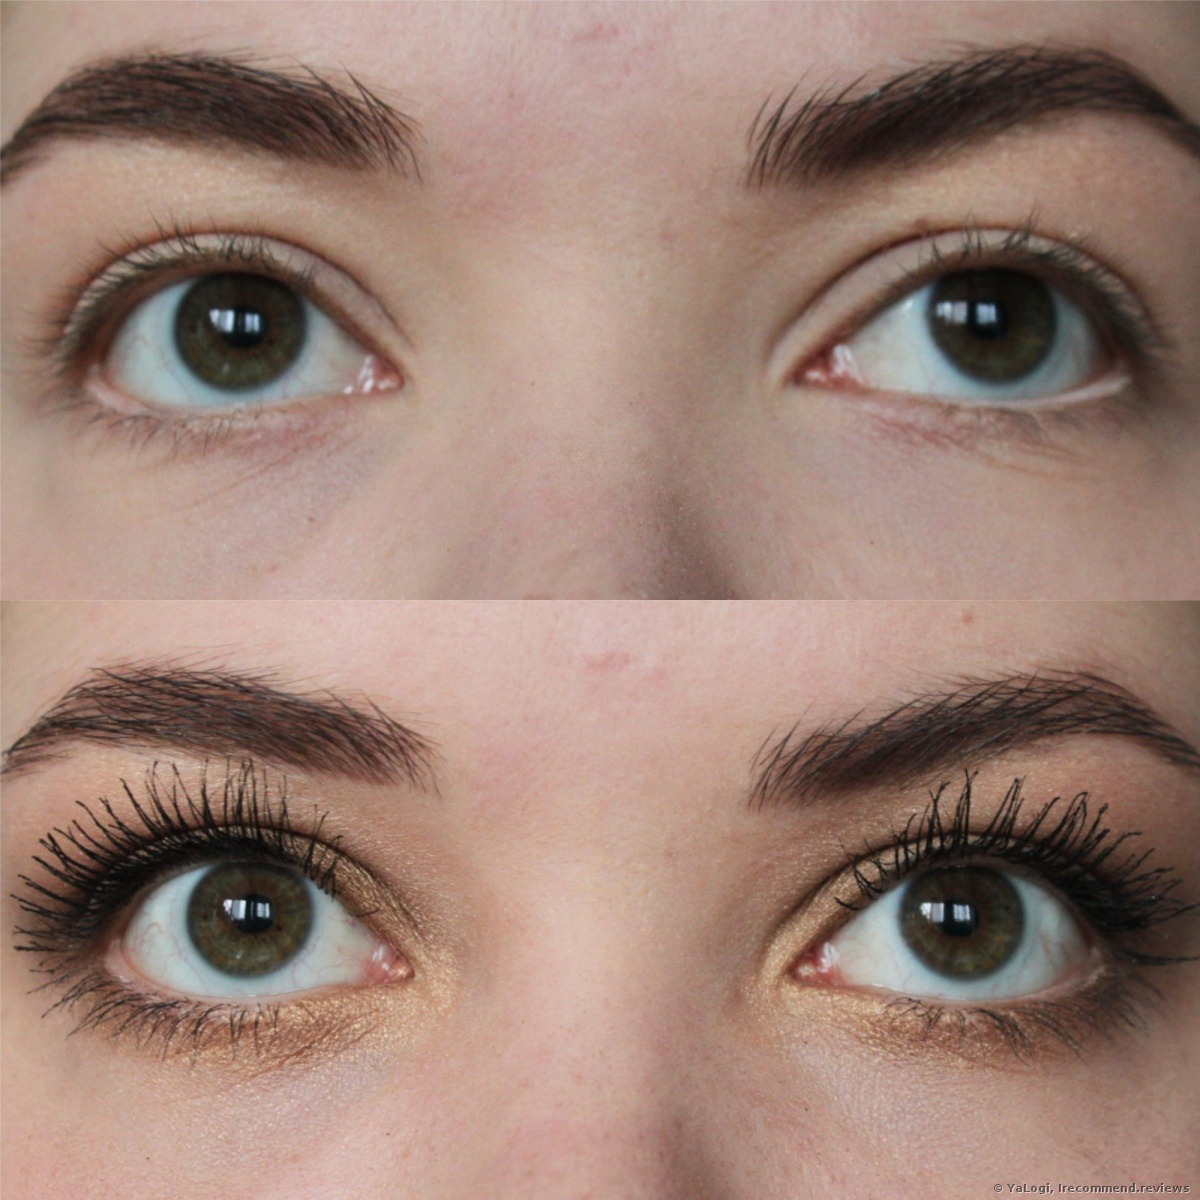 The really good never awesome. Mascara mascara Waterproof | Hype shots reviews - it is worth BEFORE/AFTER the «Is hype? This but Worth » NYX Consumer